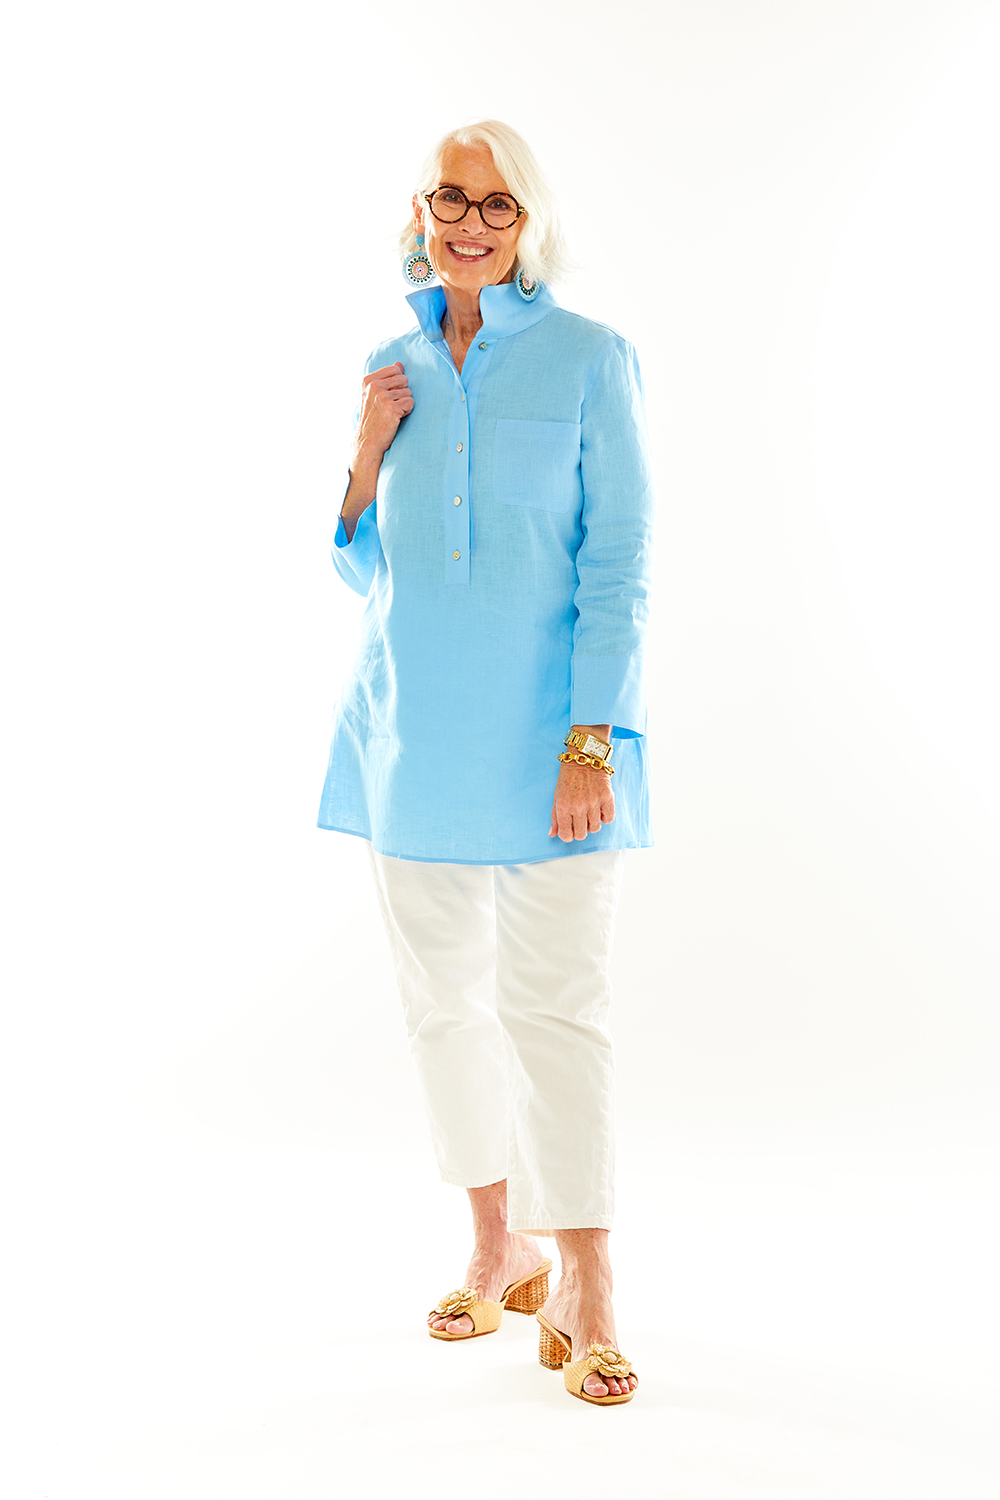 Woman in pacific blue tunic